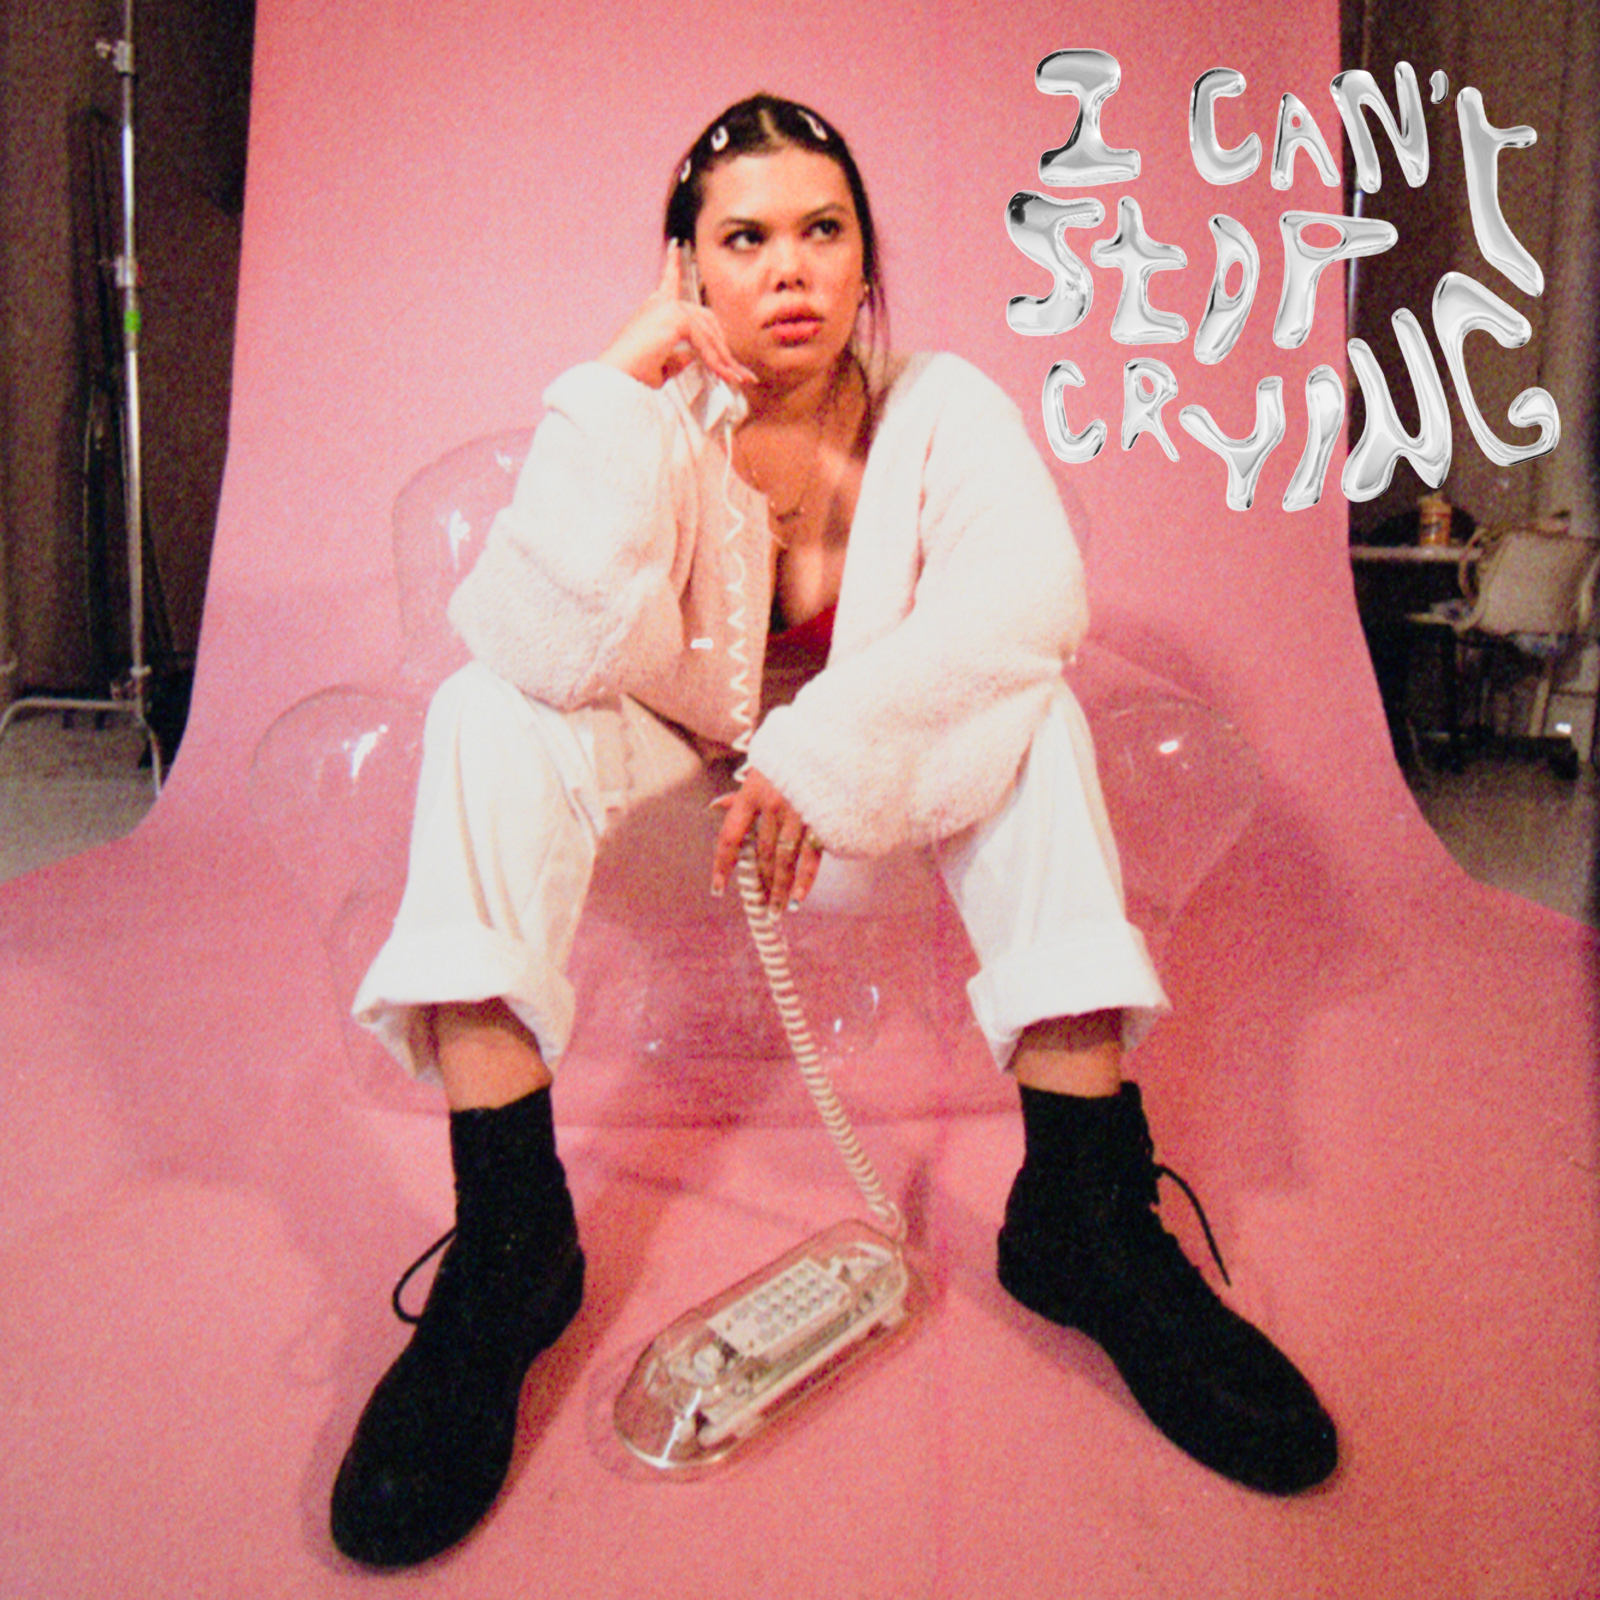 Bronx-bred Alt Rnb Artist Jessa Releases New Single “I Can’t Stop Crying”